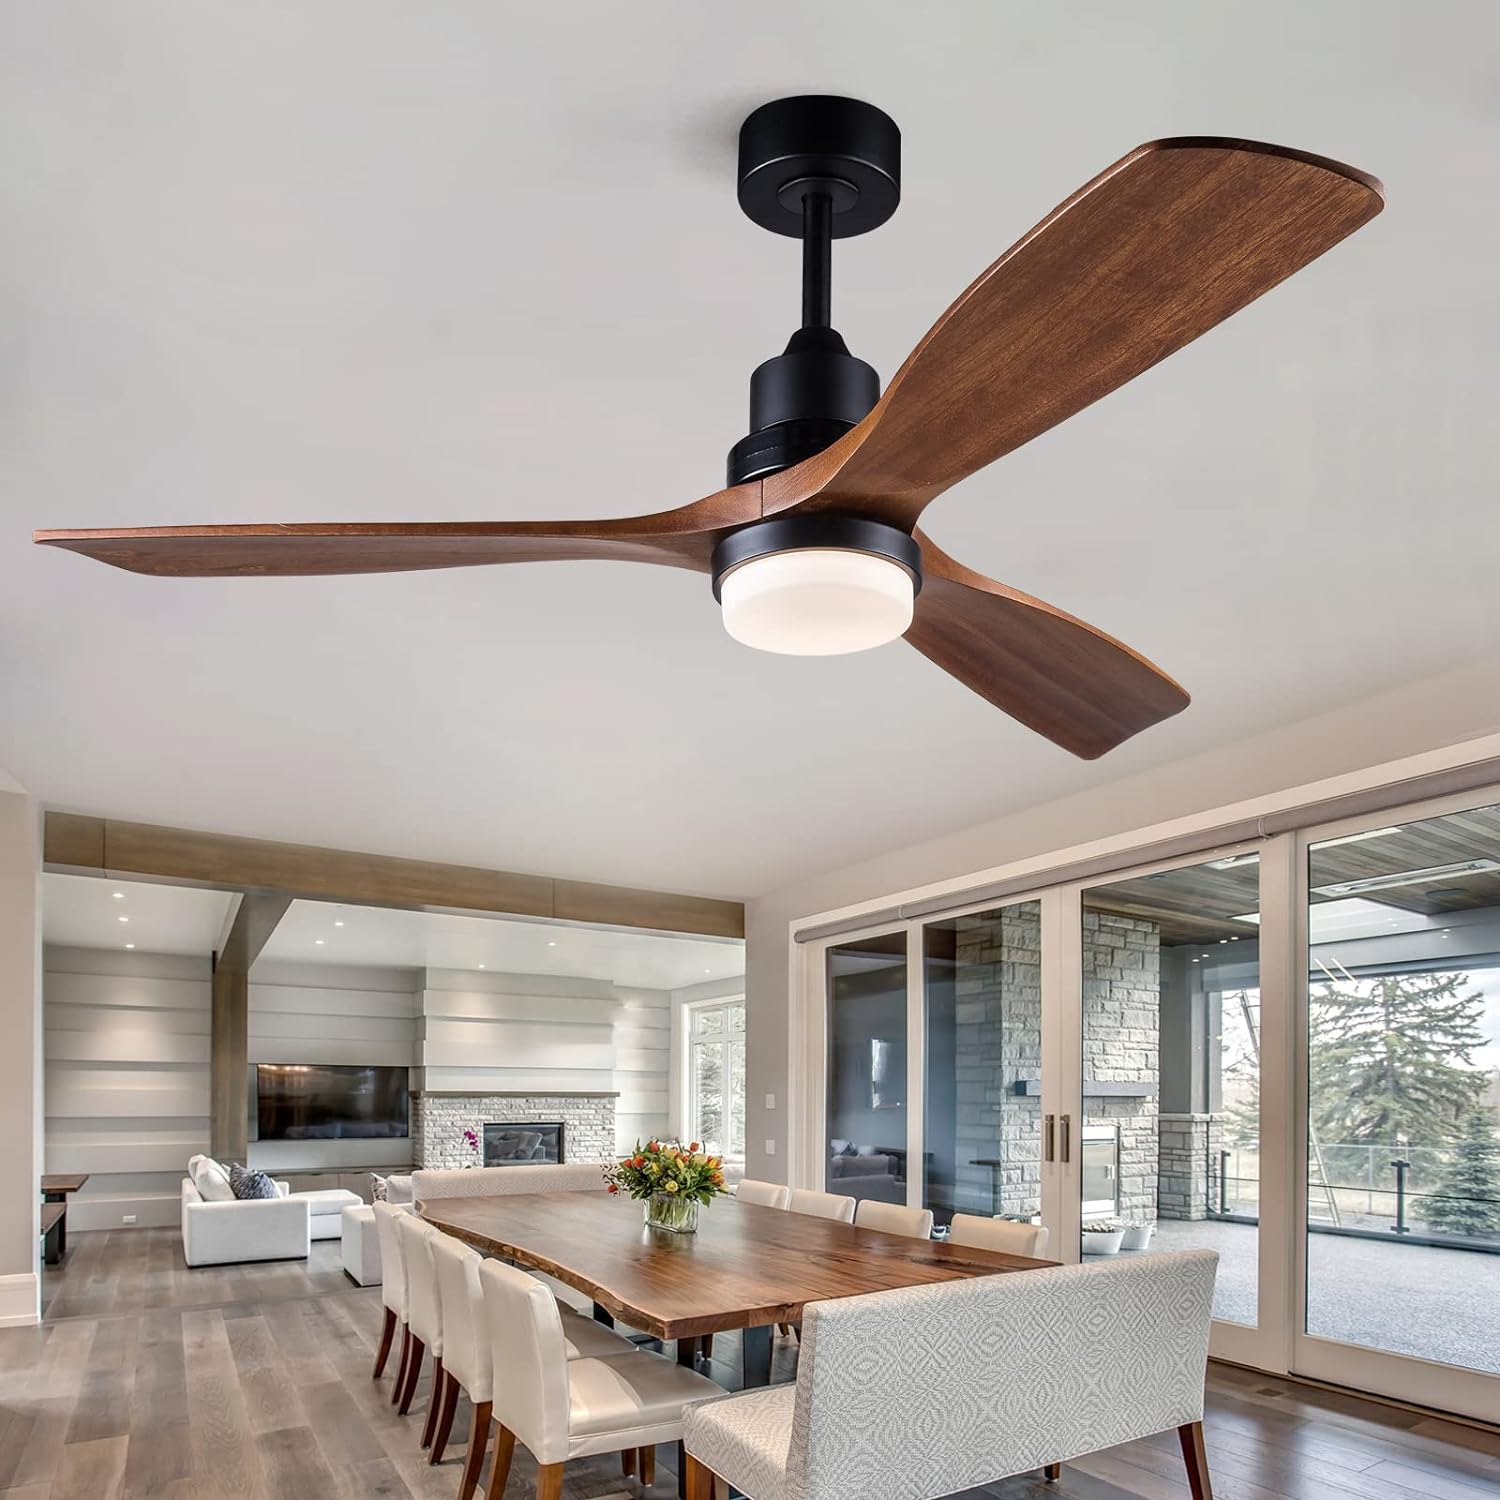 BOJUE 52 Ceiling Fans with Lights and Remote Control, Indoor Outdoor Mordern Ceiling Fan with 3 Wood Blade for Patio Living Room, Bedroom, Office, Summer House (Black Ceiling fans+ Walnut Blades)